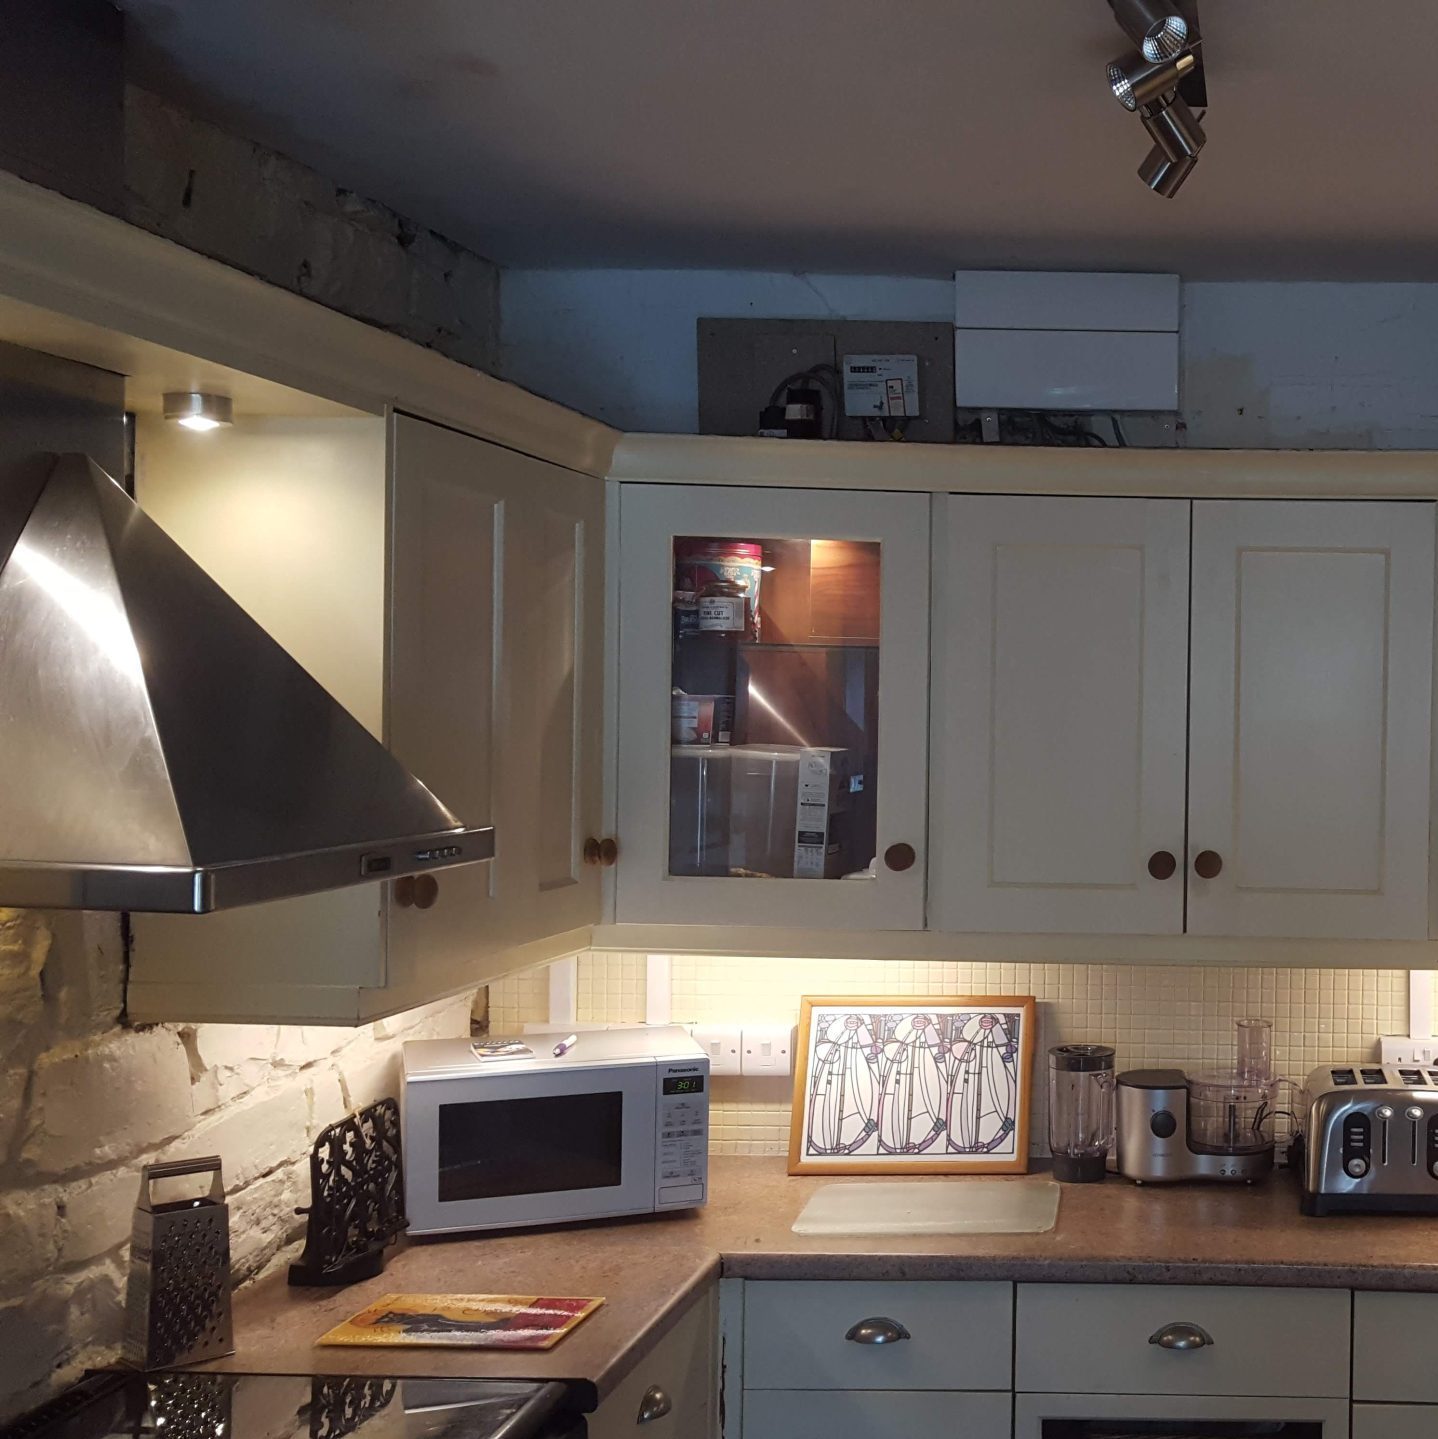 Kitchen lit up with spot lights and electrical appliances